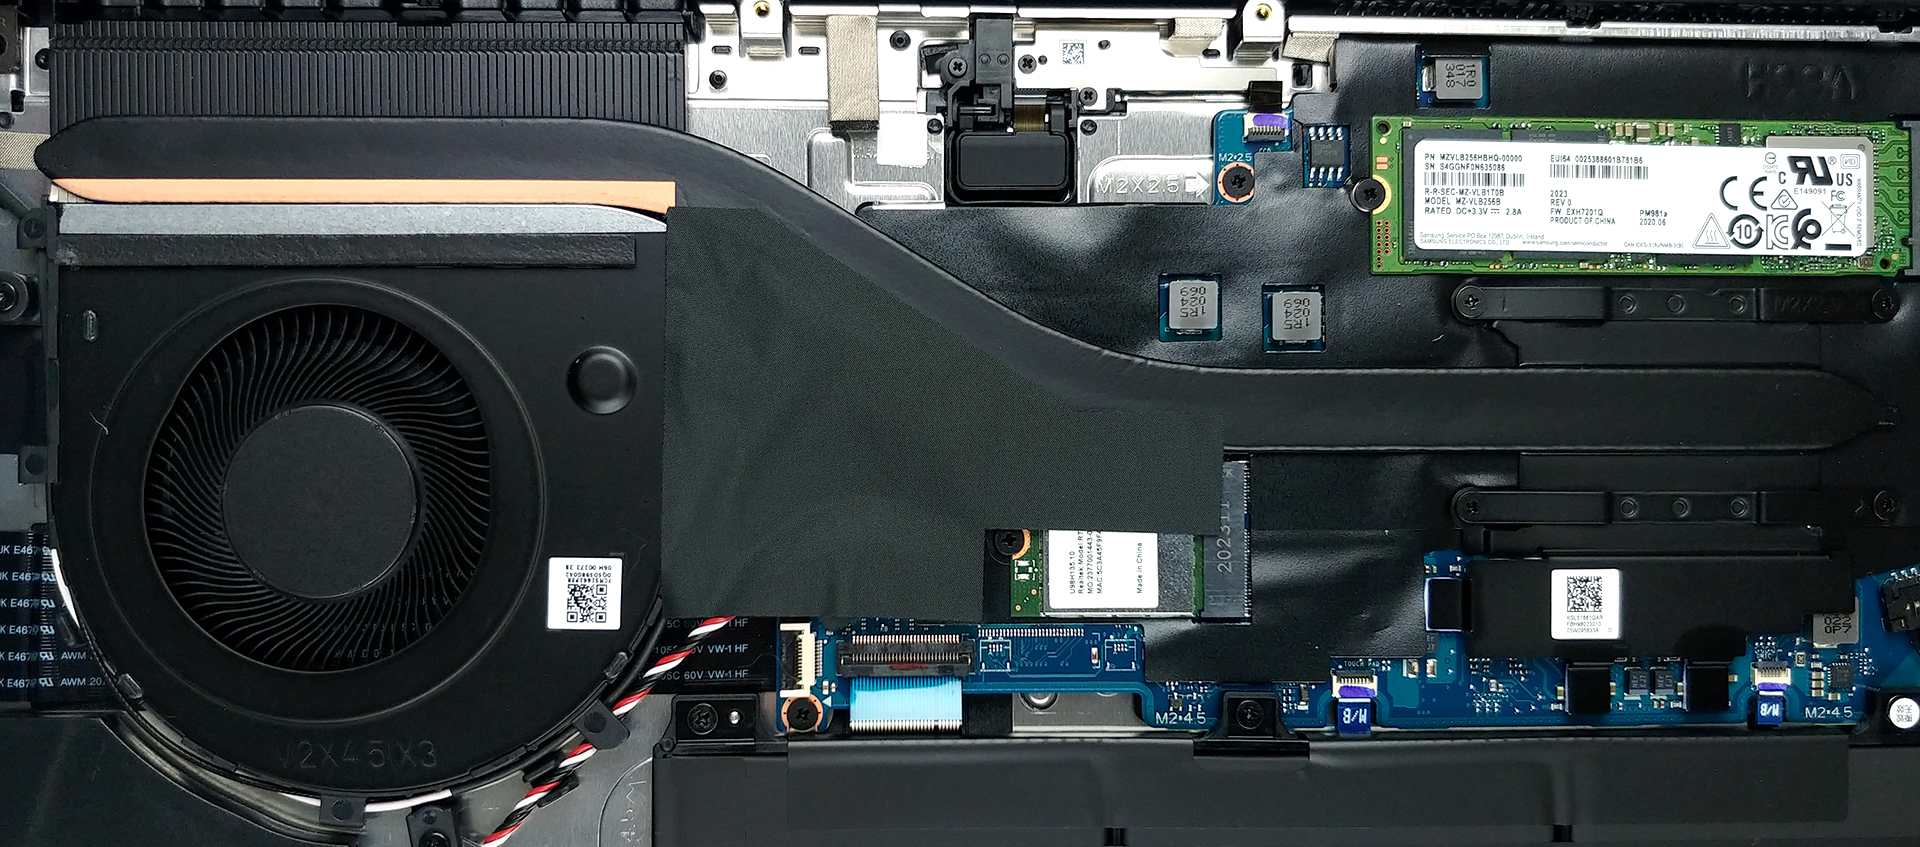 🛠️ Huawei MateBook D 14 (2020) - disassembly and upgrade options 